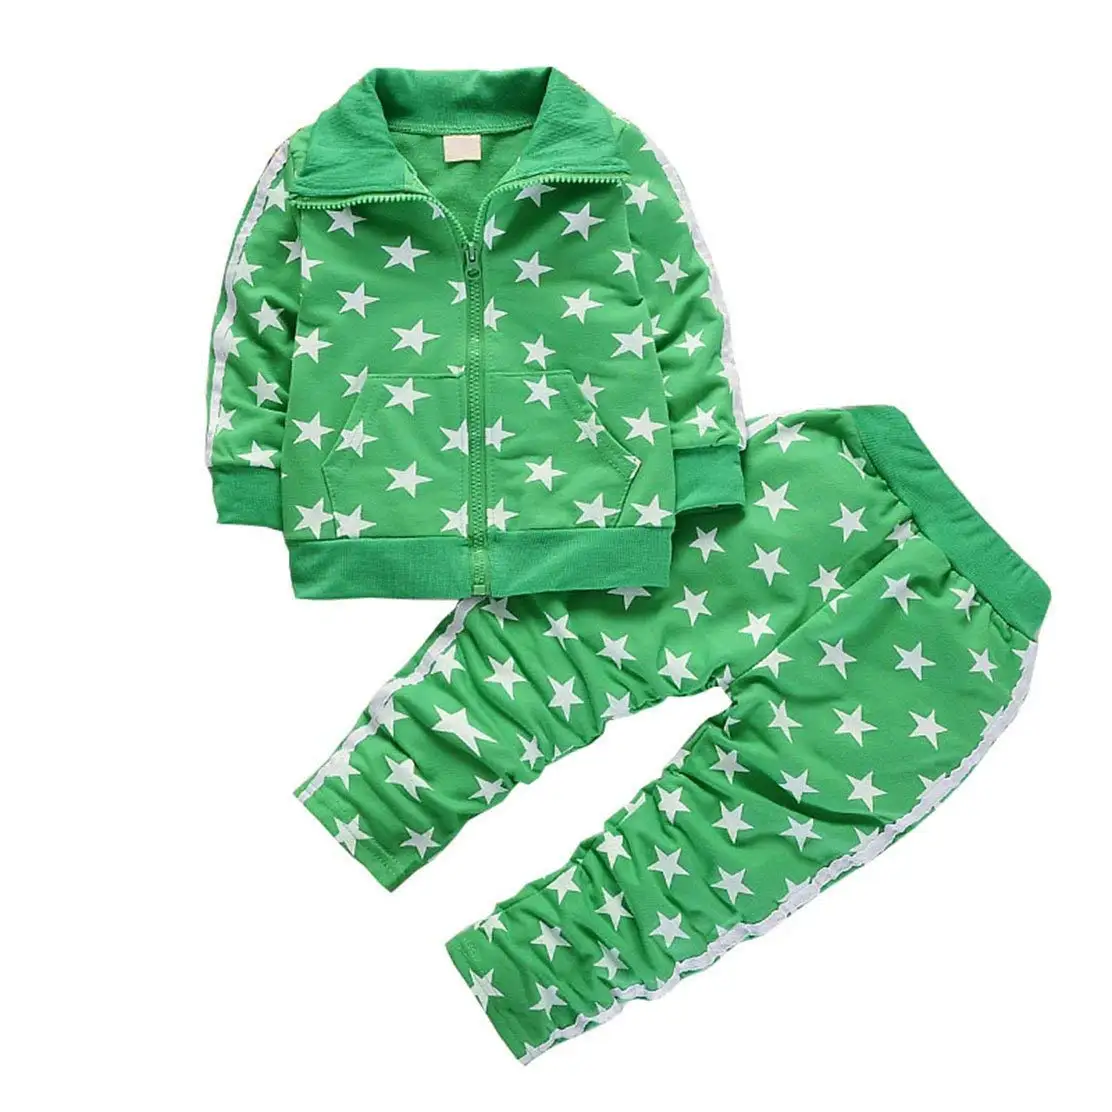 Buy > adidas tracksuit for babies > in stock